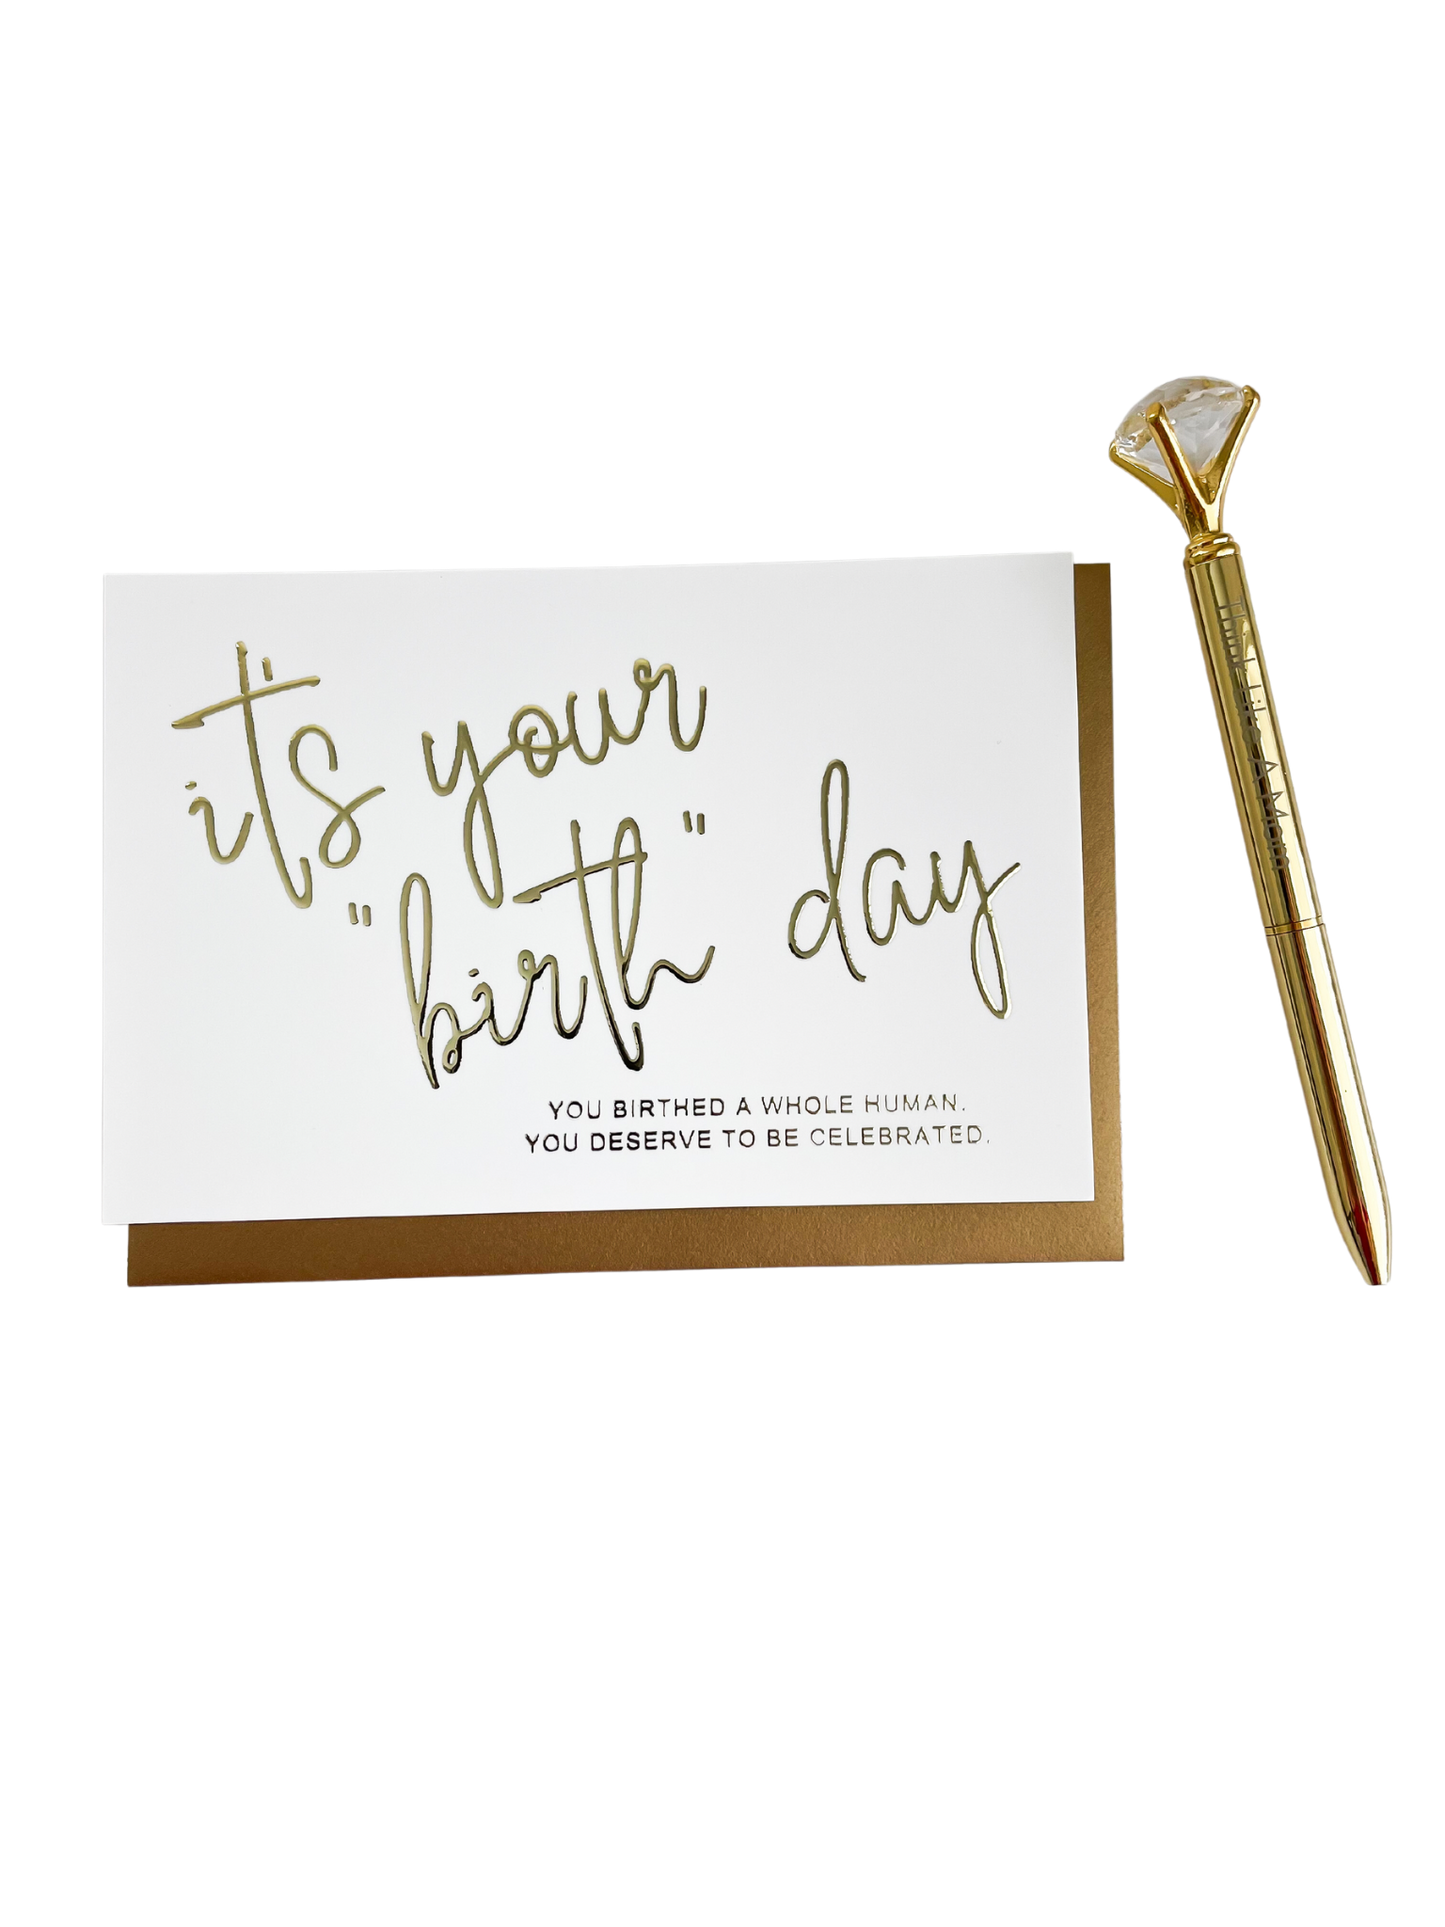 It's Your "Birth" Day Postcard